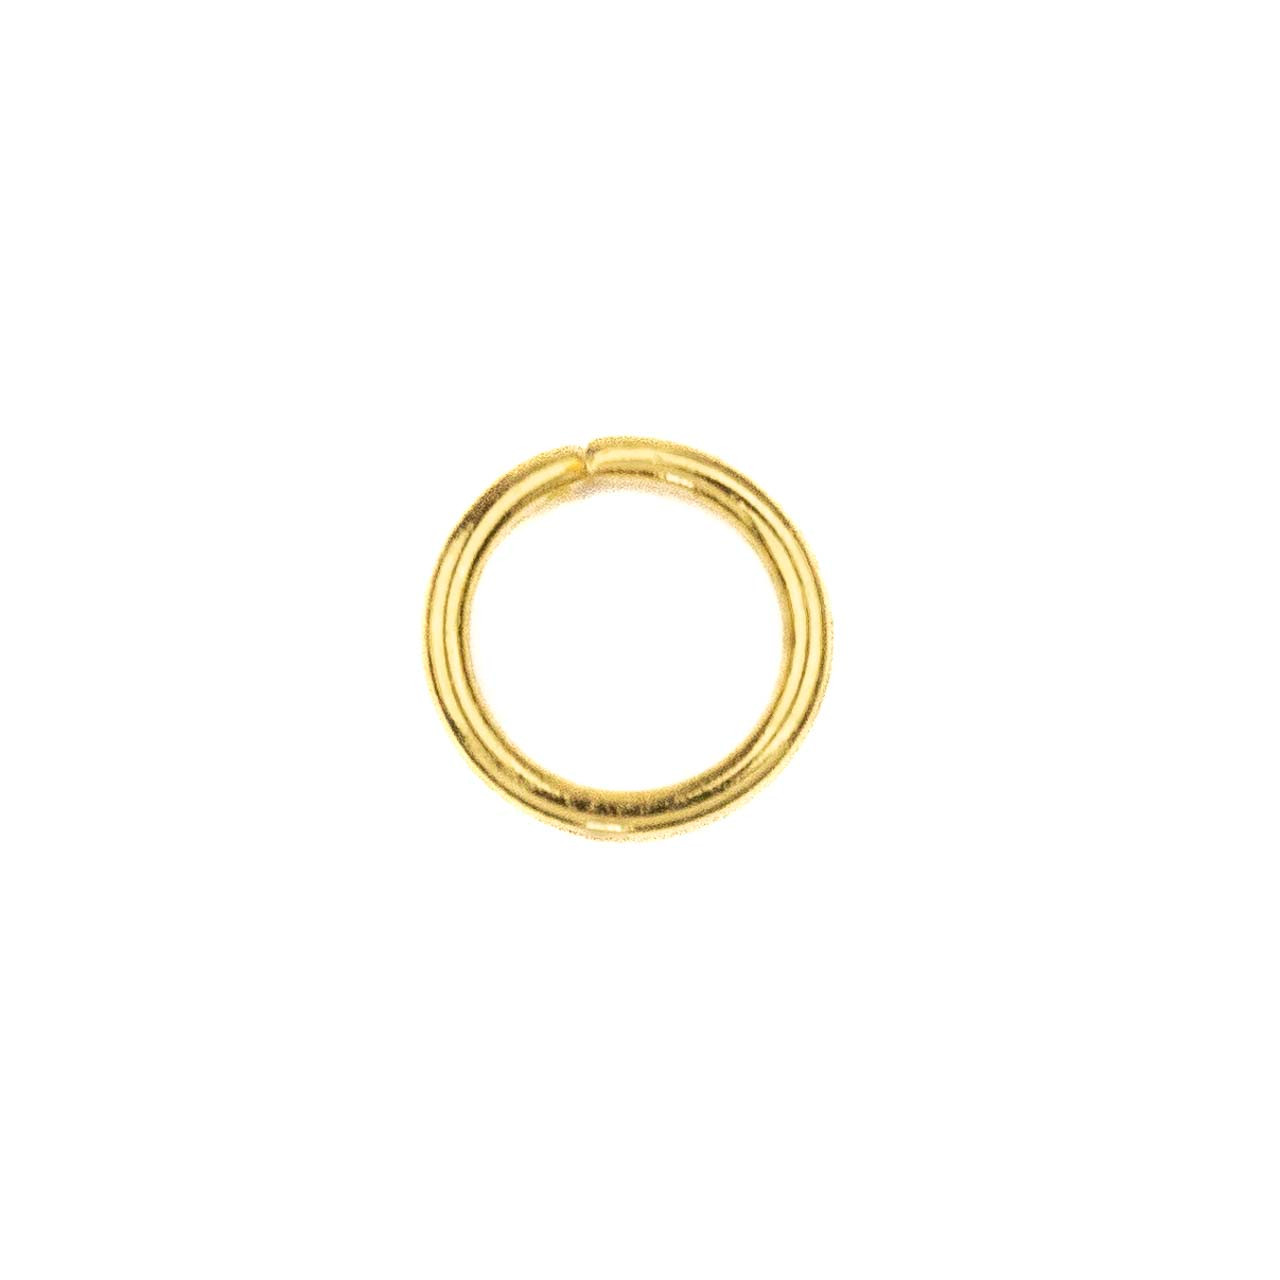 18k Gold Plated Stainless Steel 18 gauge 8mm Open Jump Rings - 100 per bag